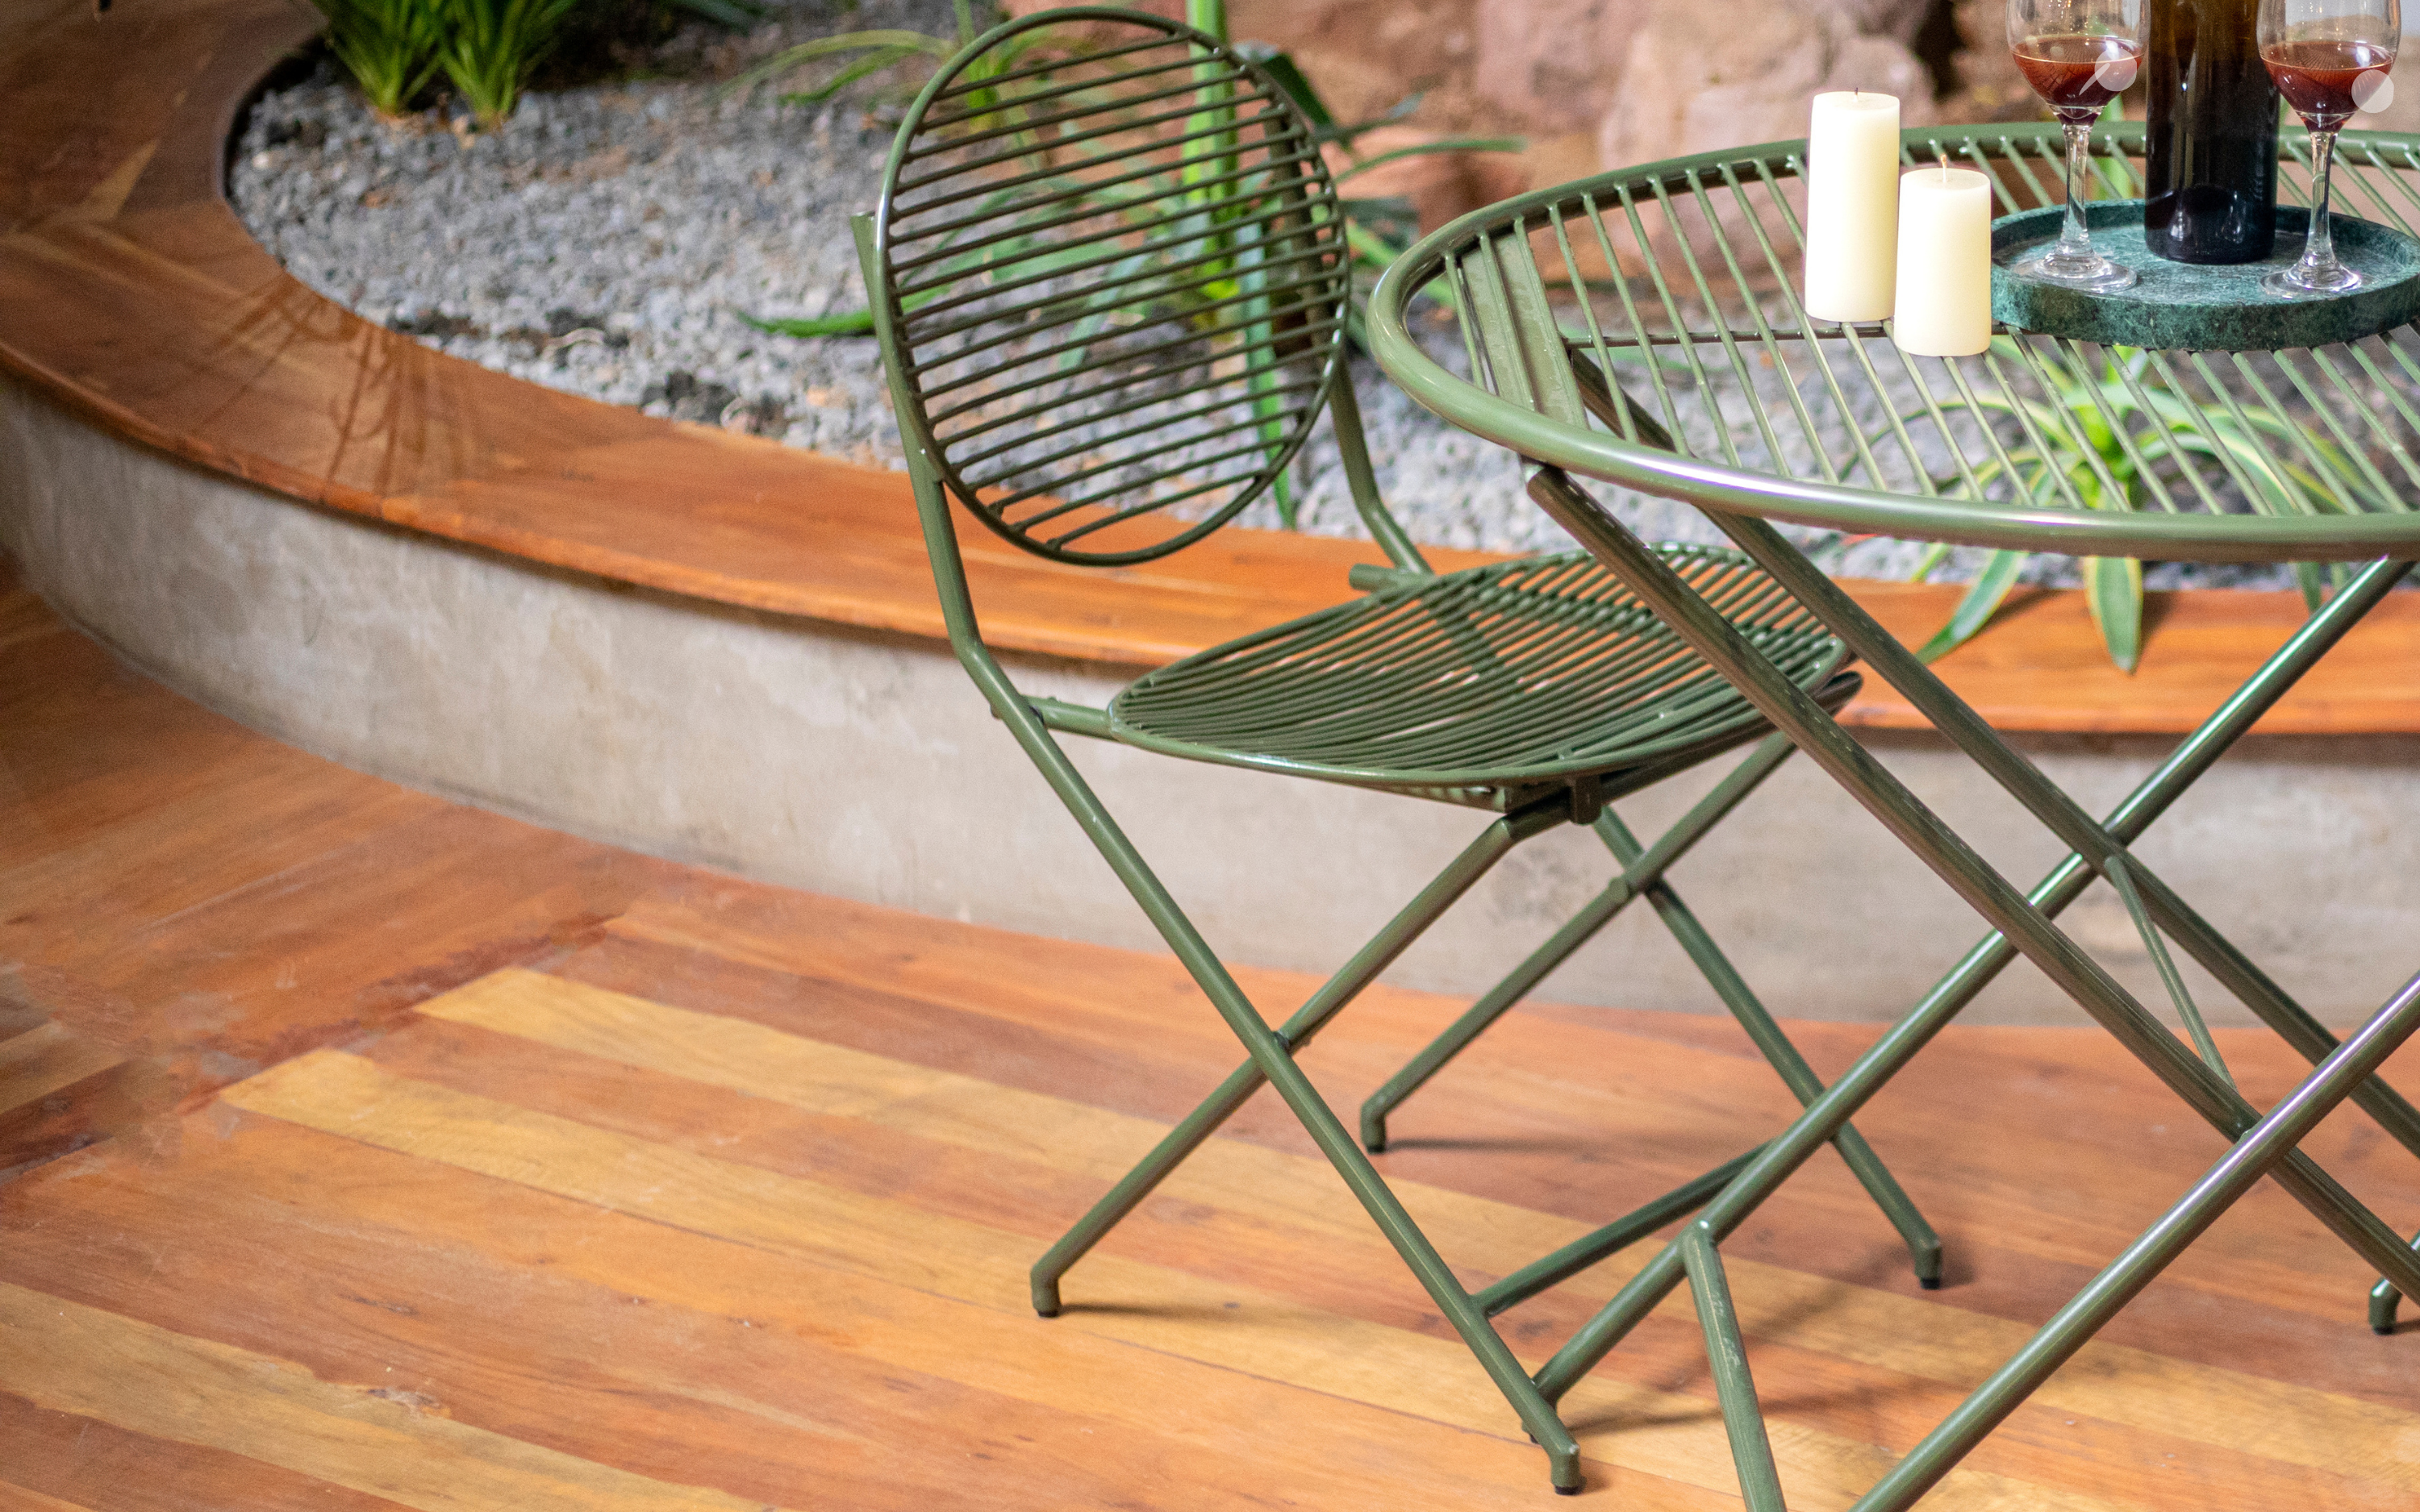 patio furniture. patio designs. backyard decorating ideas.outdoor chairs and tables.